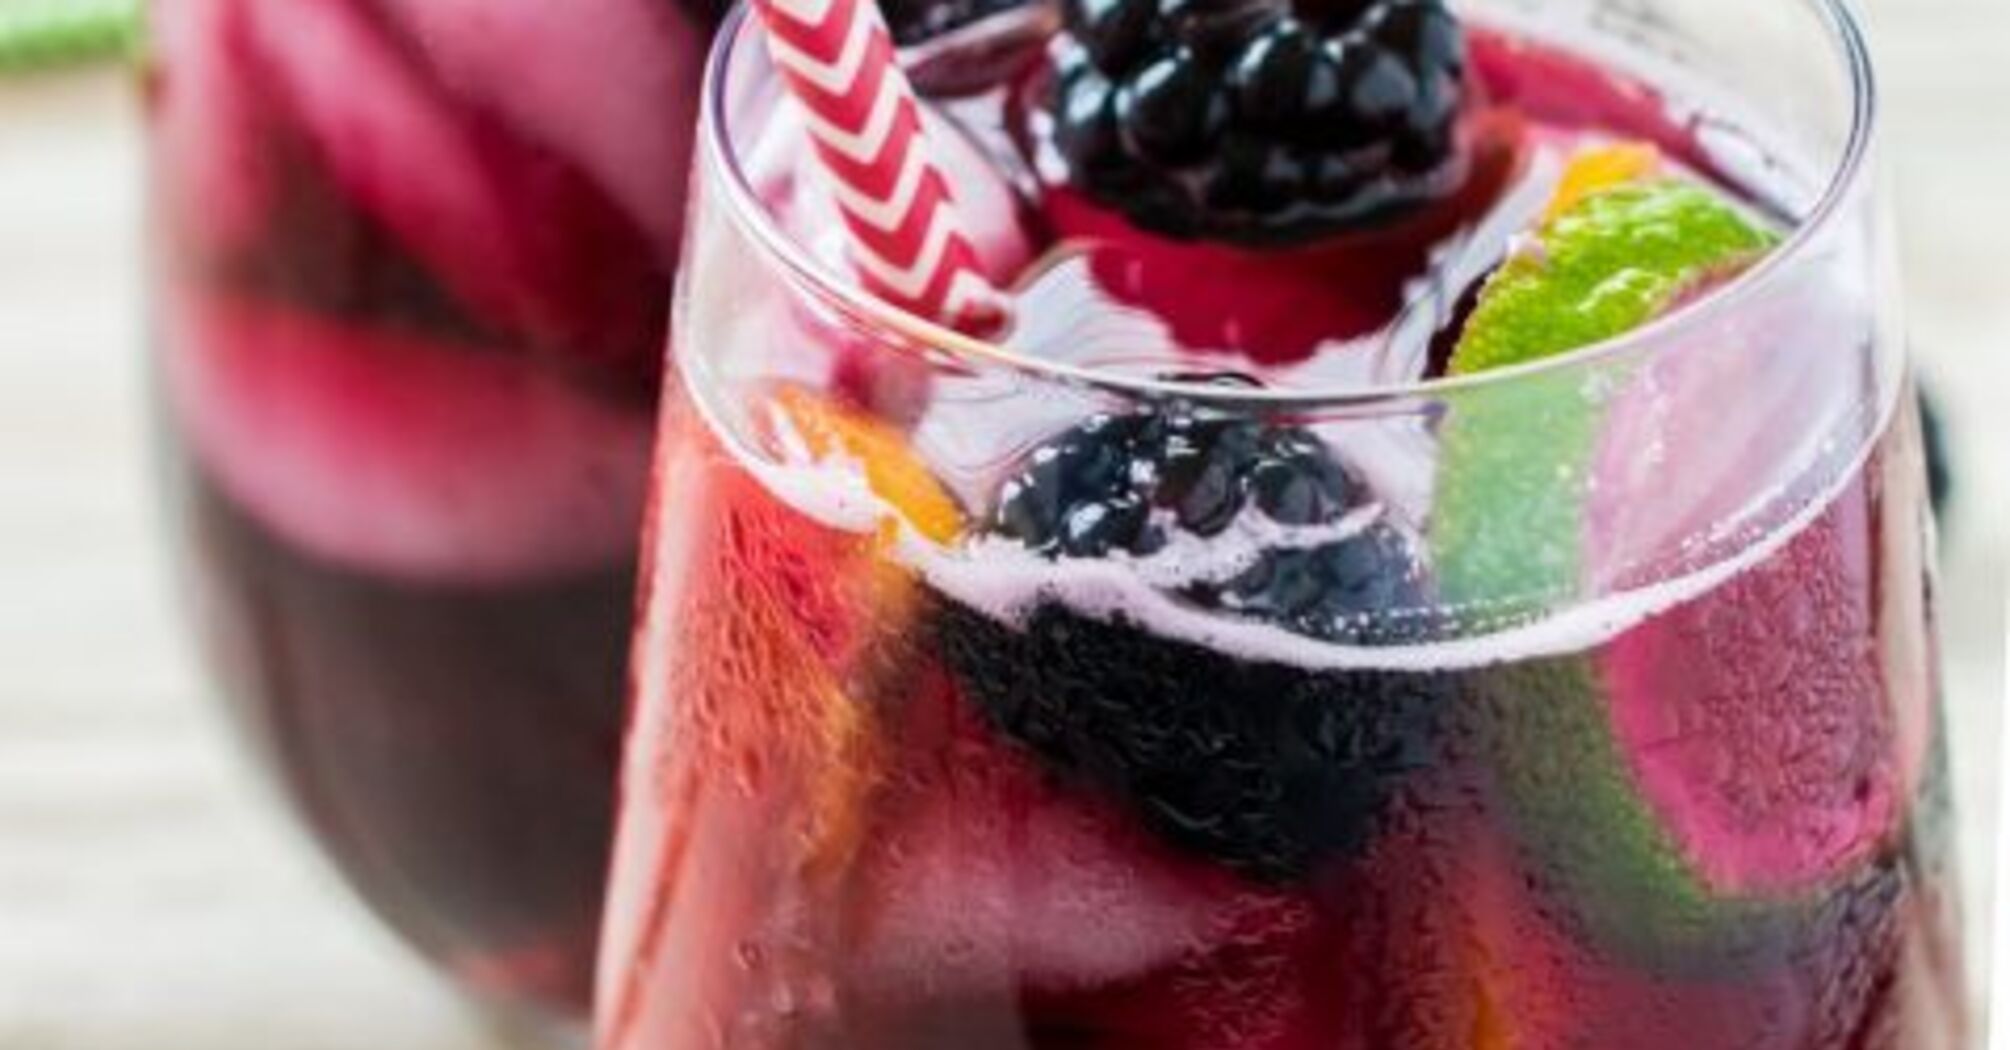 Blackberry, strawberry and passion fruit sangria